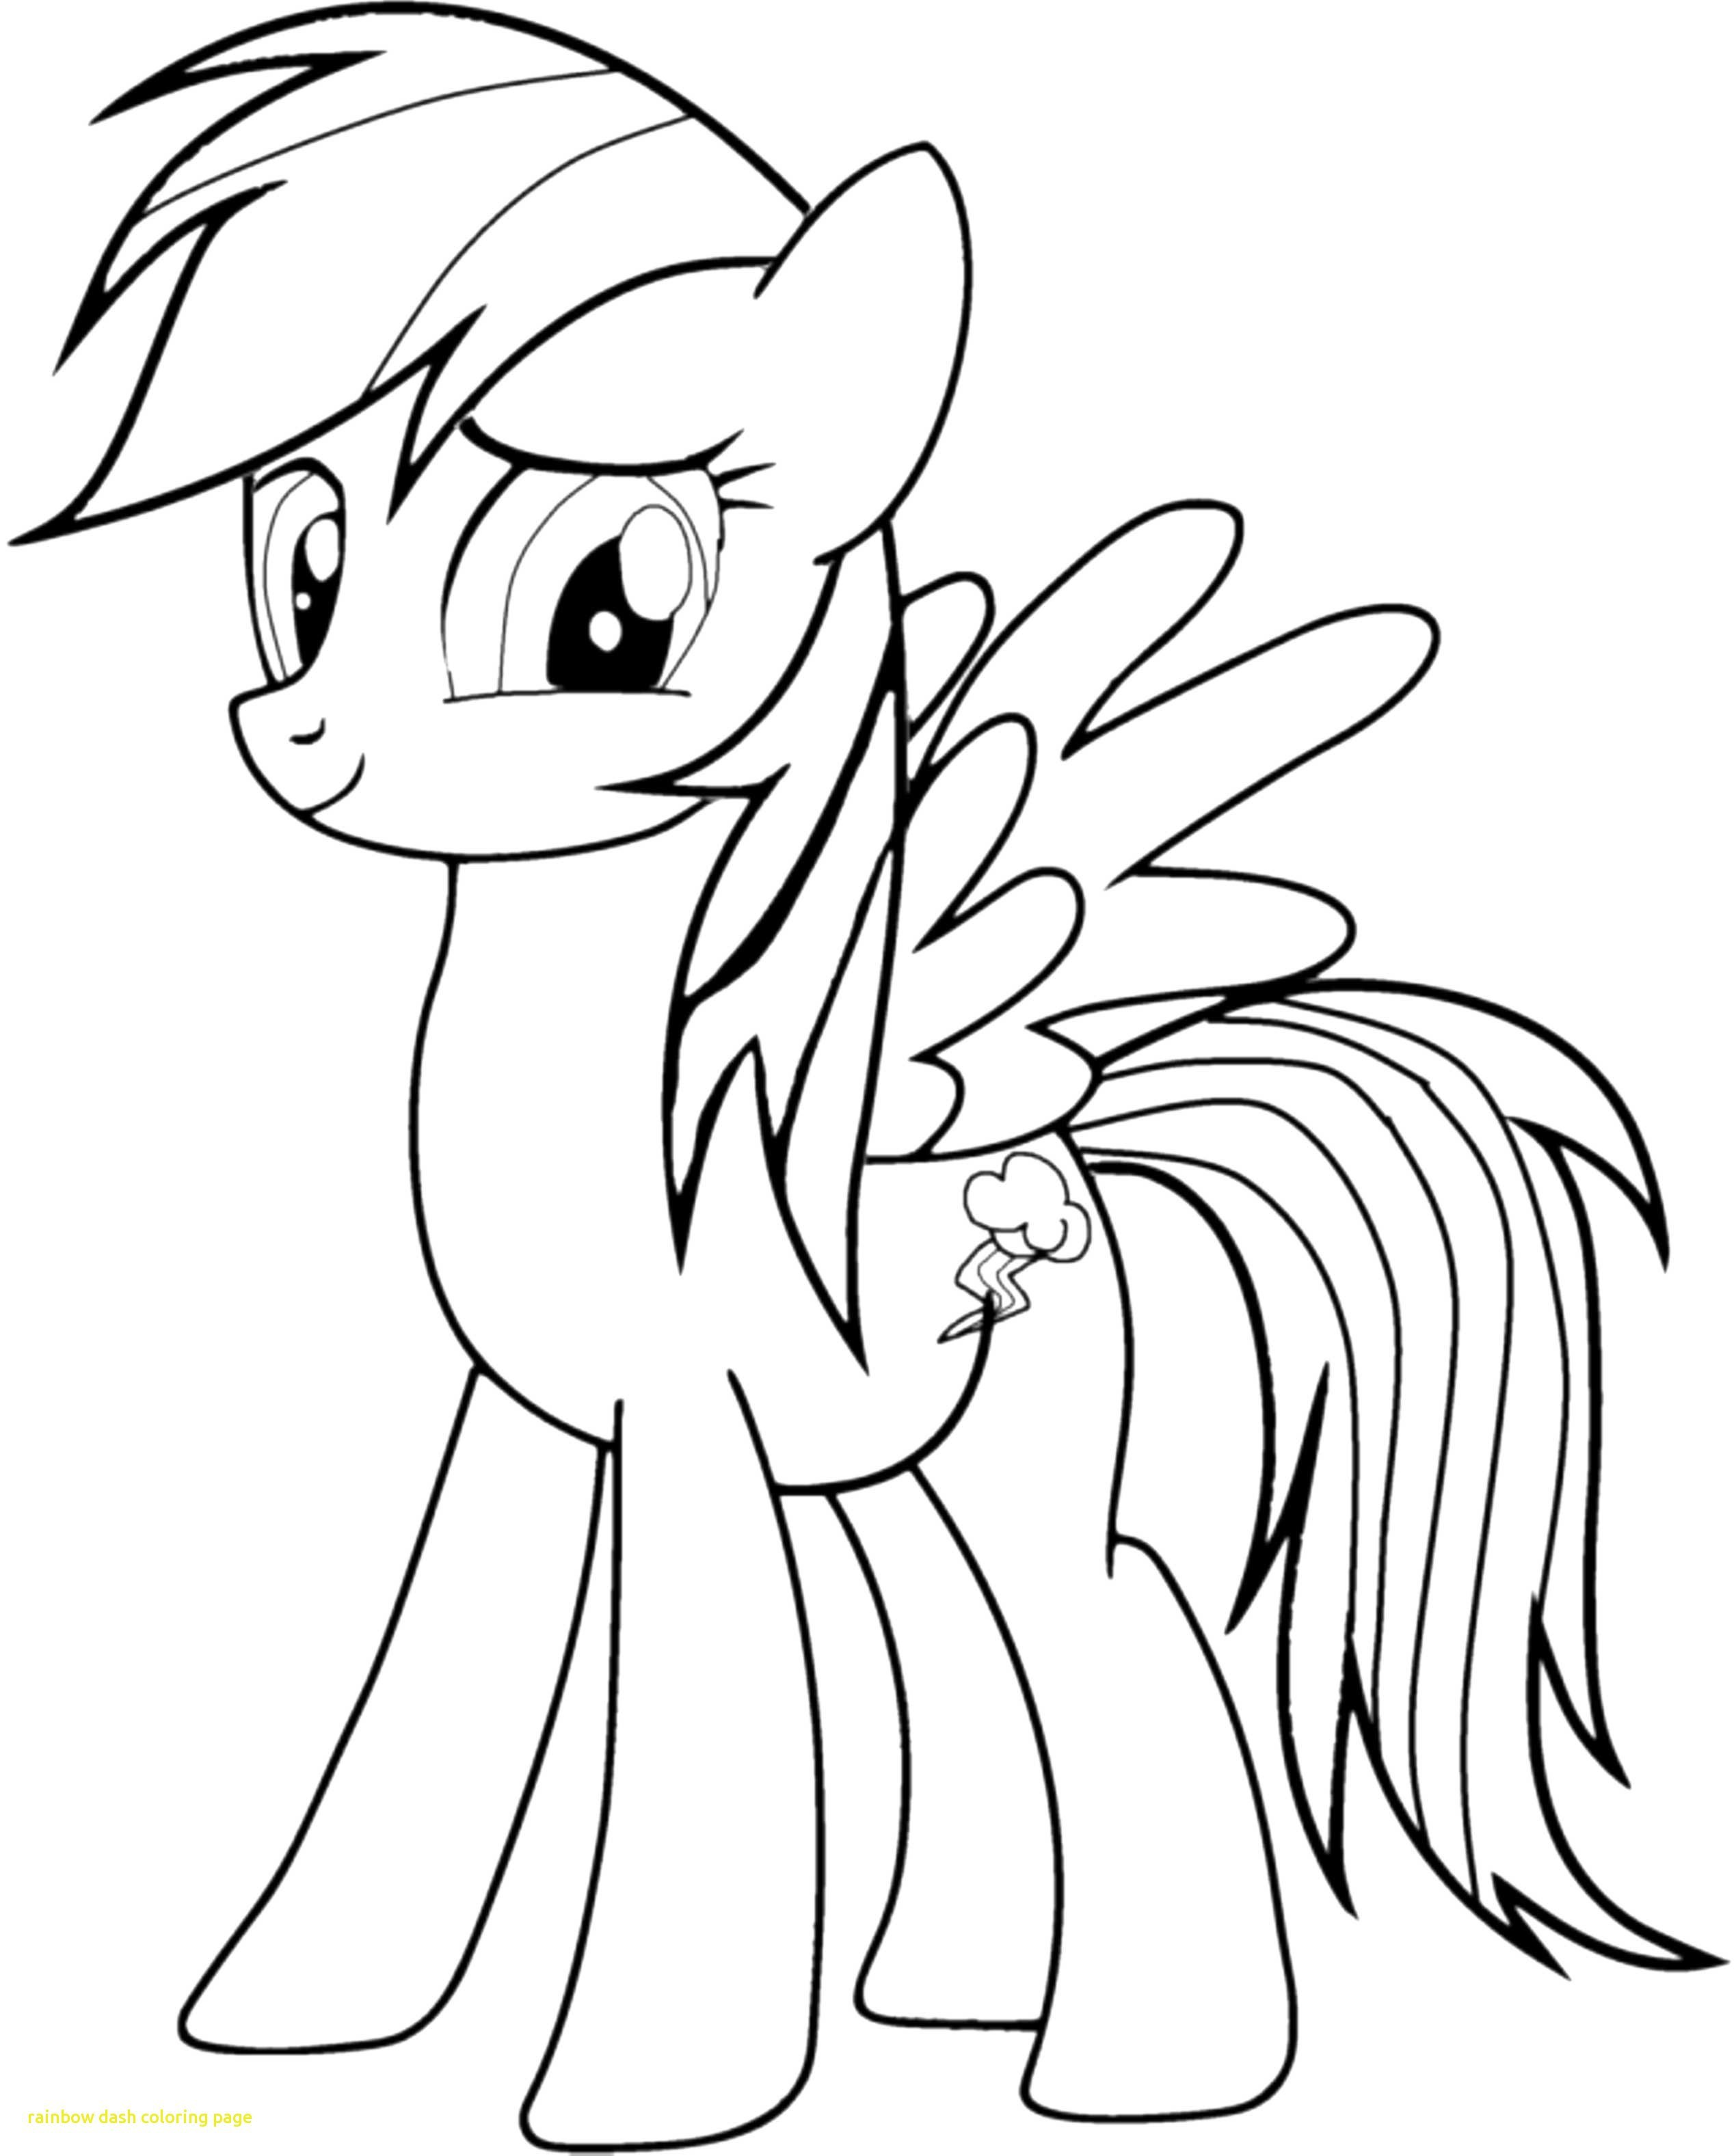 My Little Pony Coloring Pages Rainbow Dash - BubaKids.com